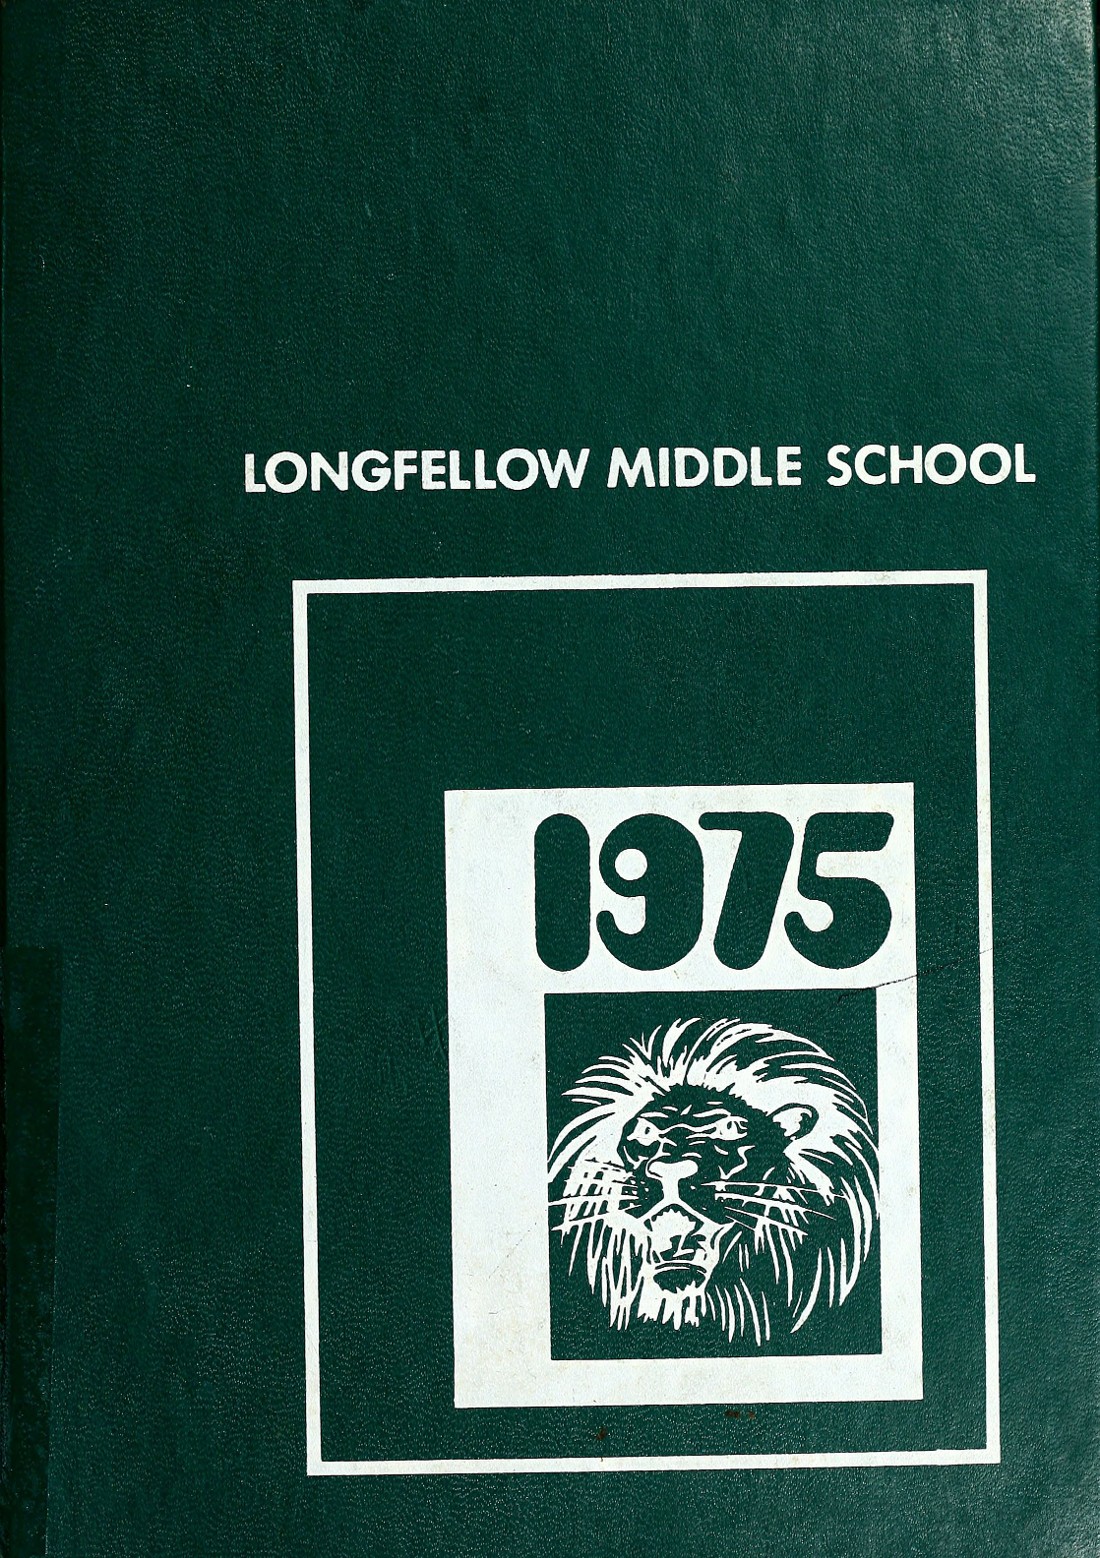 longfellow-middle-school-from-norman-oklahoma-yearbooks